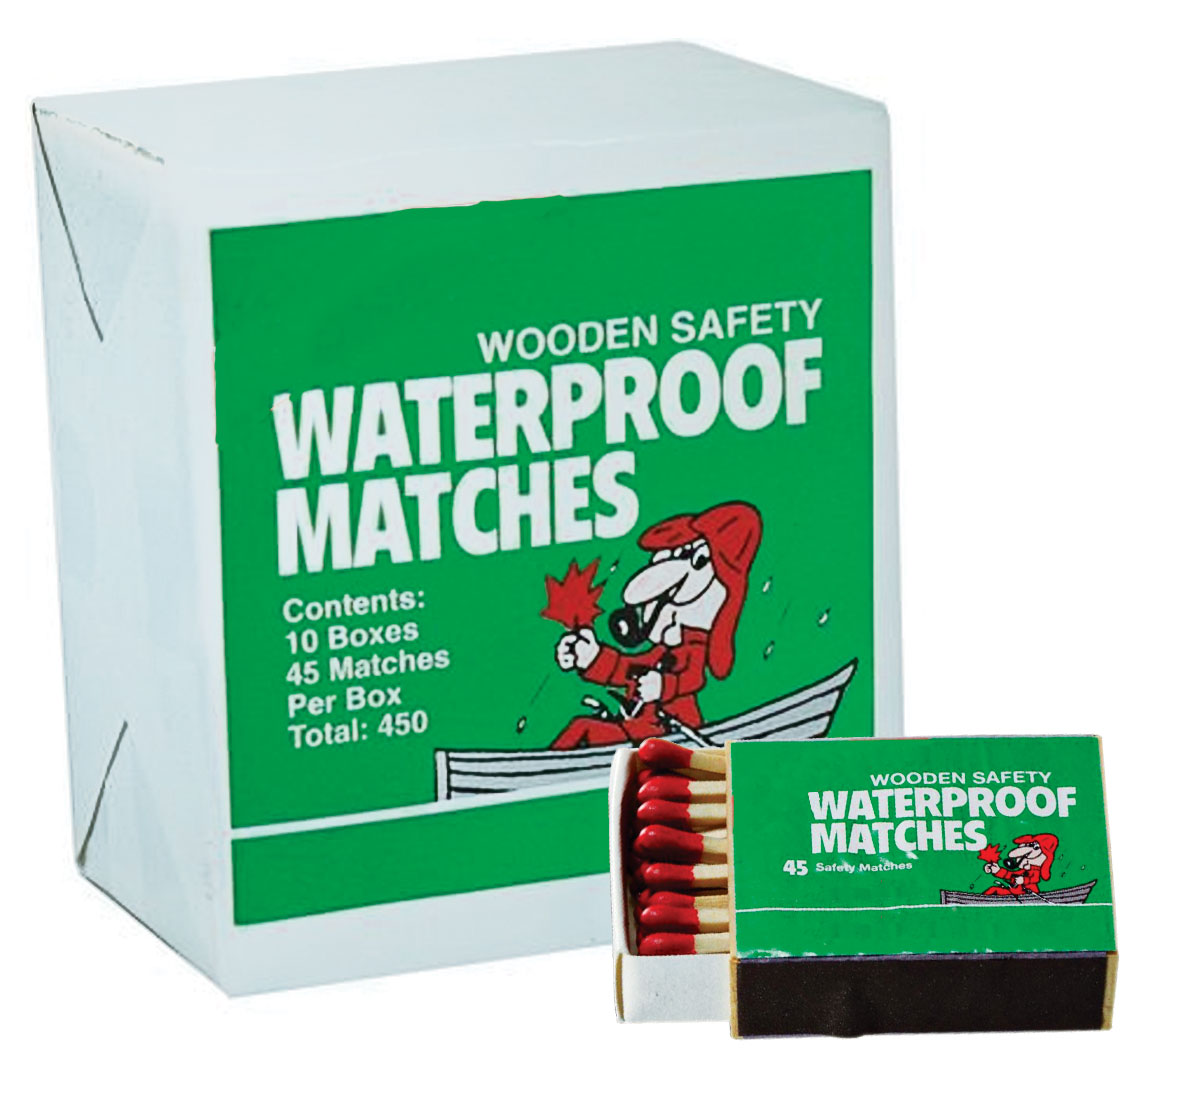 Water Proof Matches | lupon.gov.ph